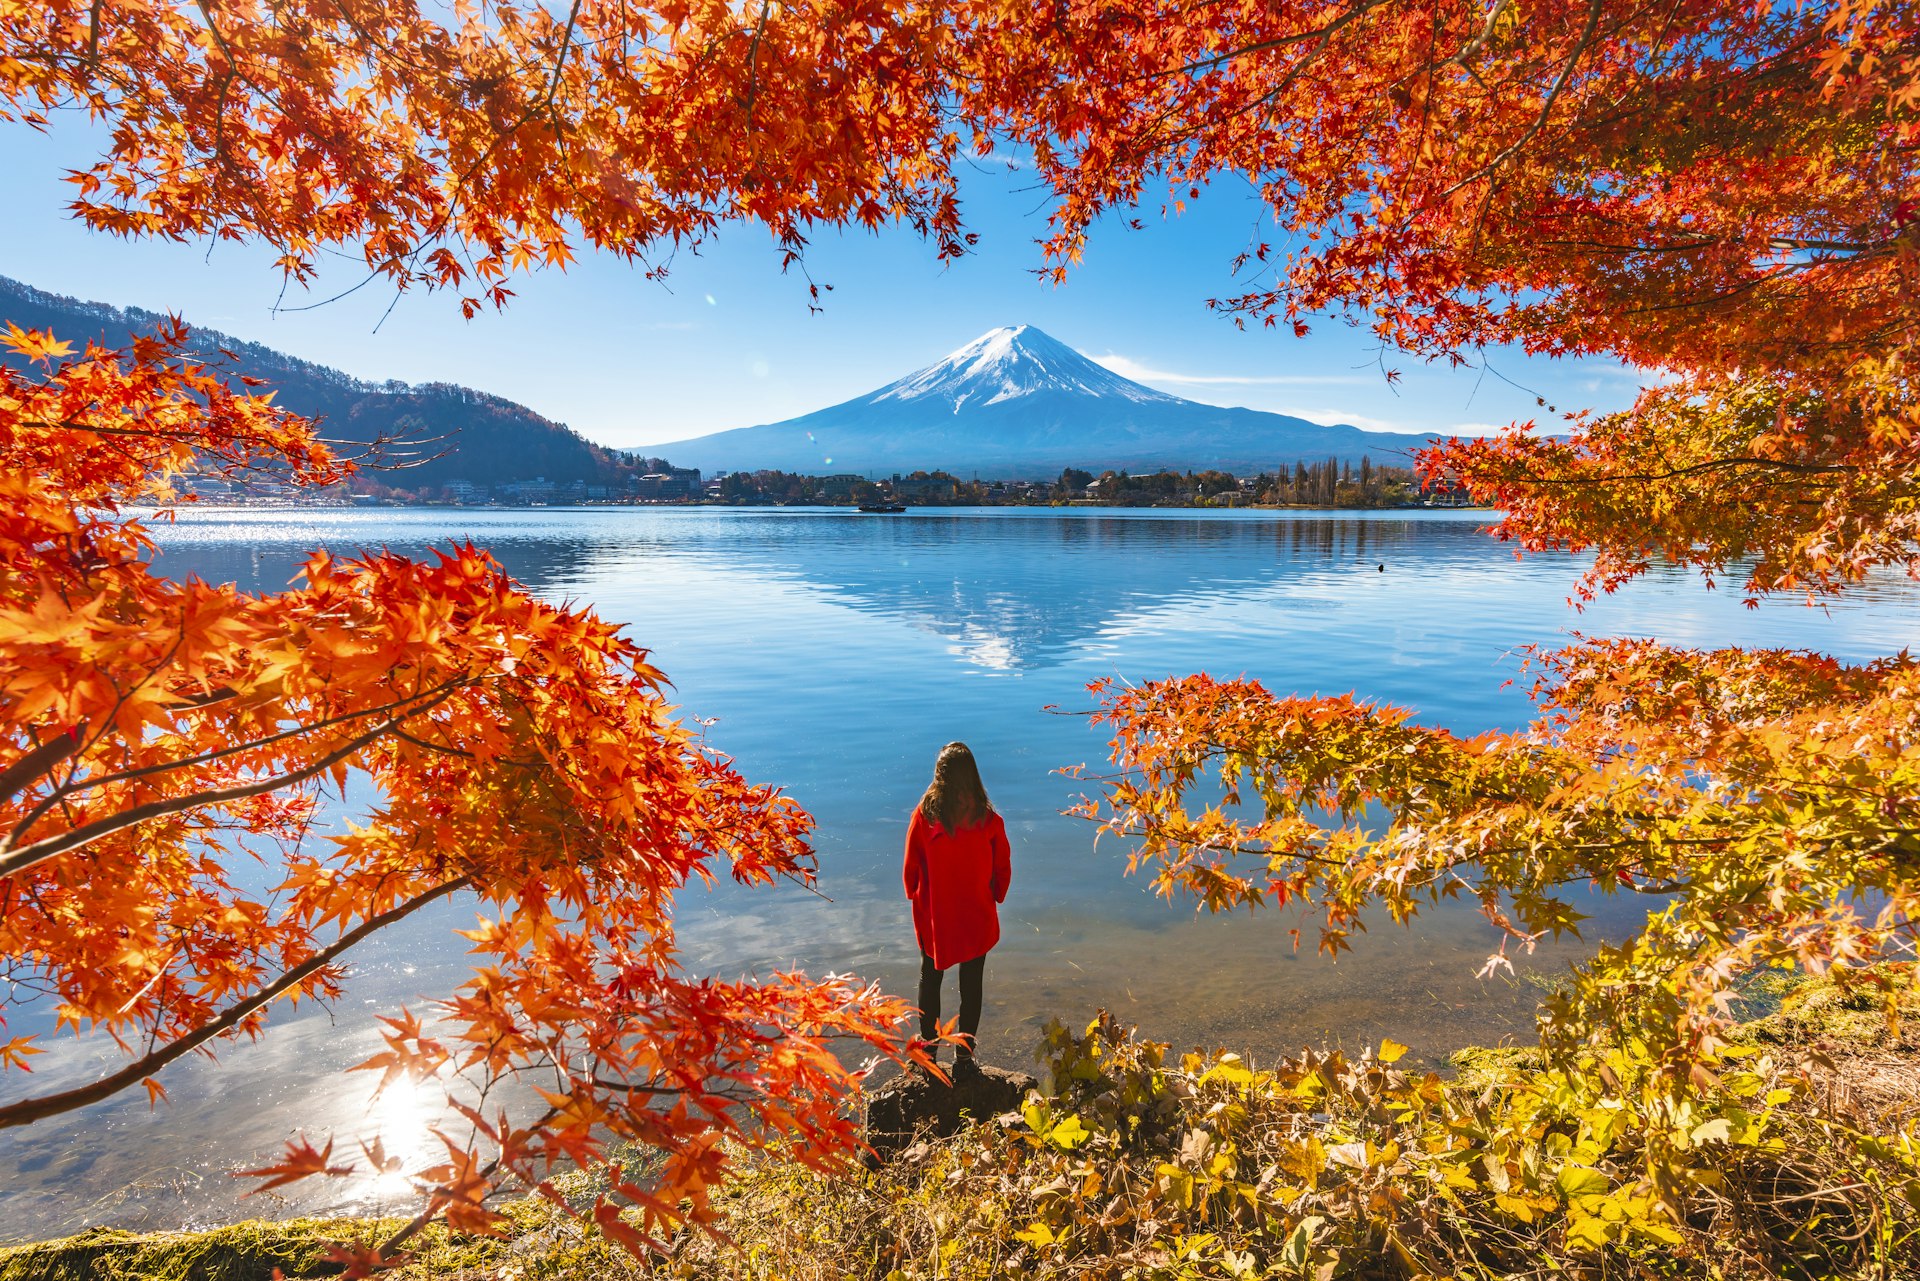 Woman framed by red maple leaves admiring Mount Fuji and Lake Kawaguchi in autumn, Japan